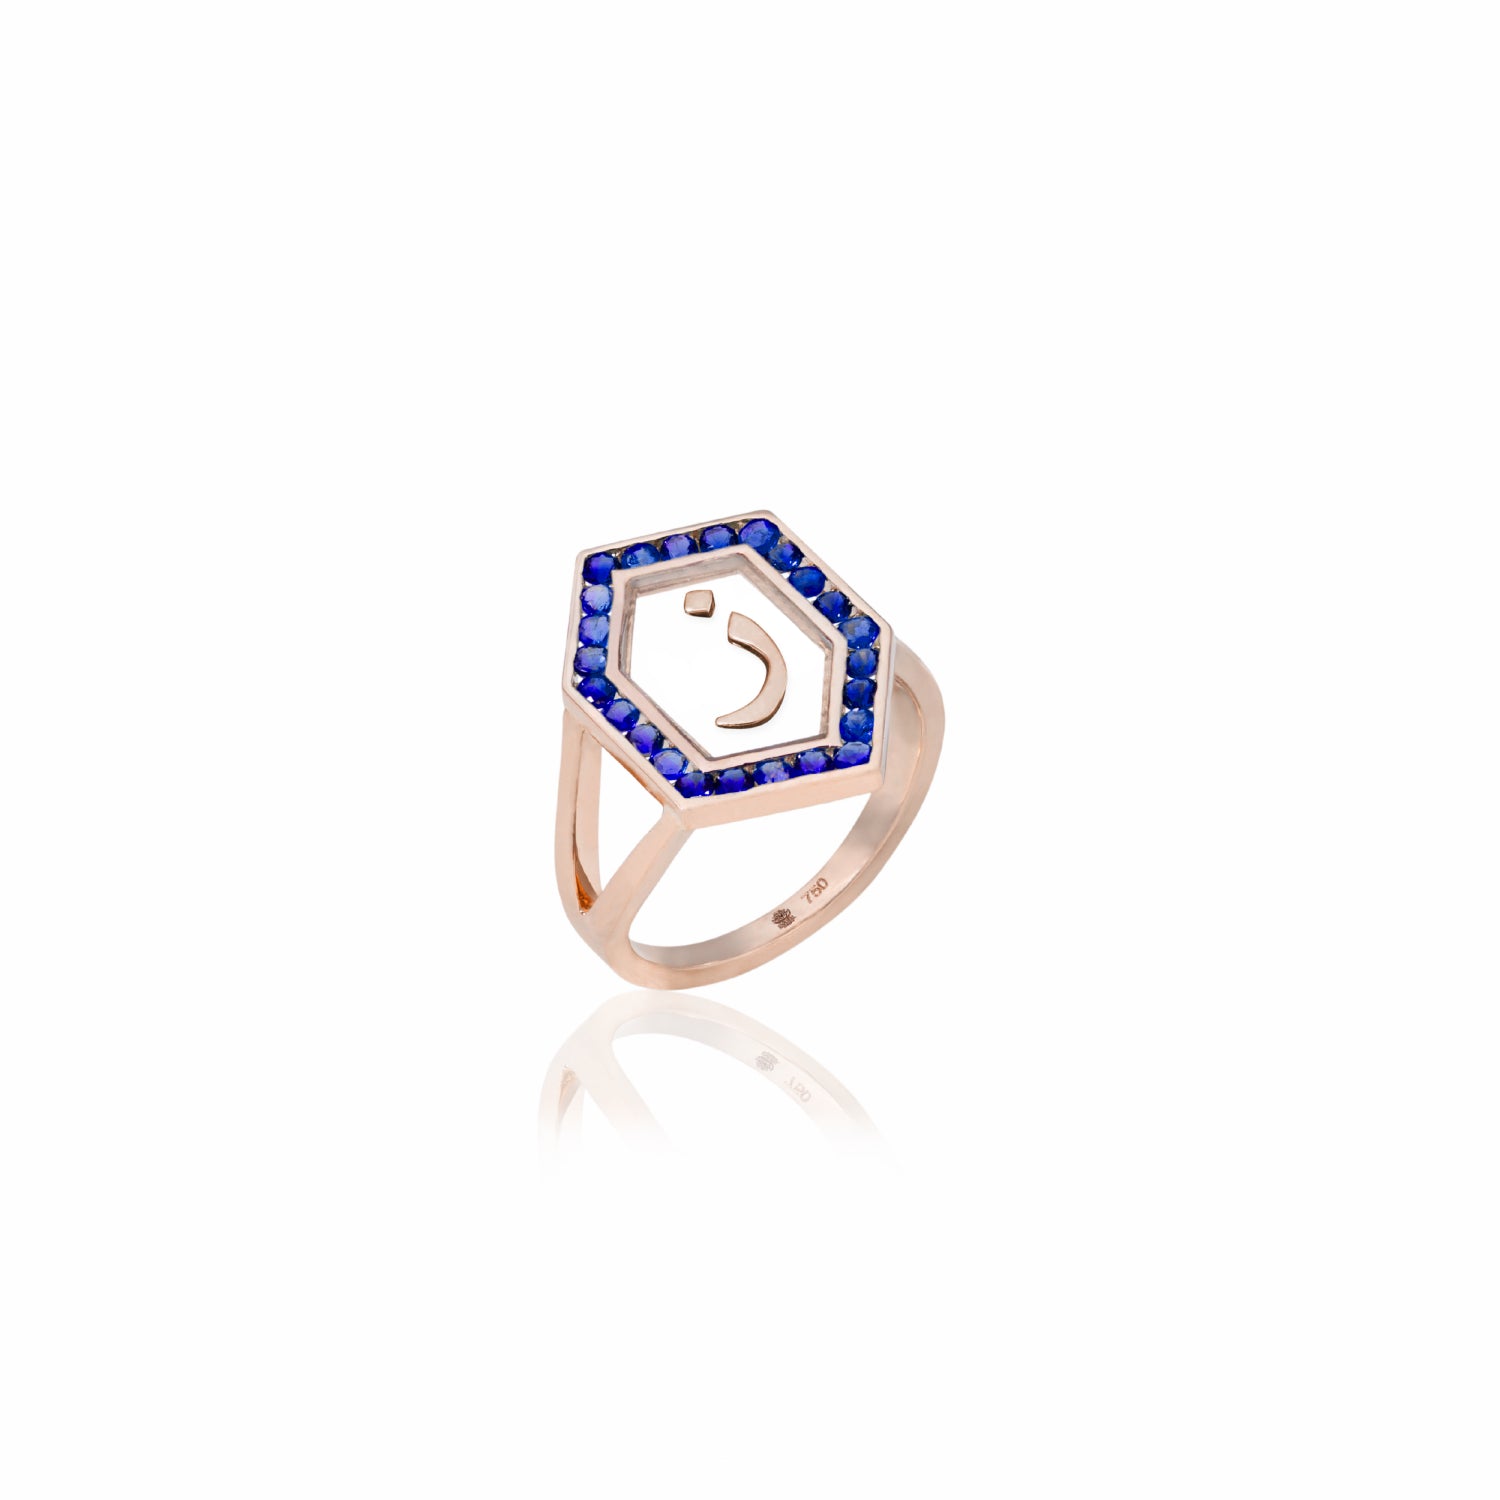 Qamoos 1.0 Letter ز Sapphire Ring in Rose Gold